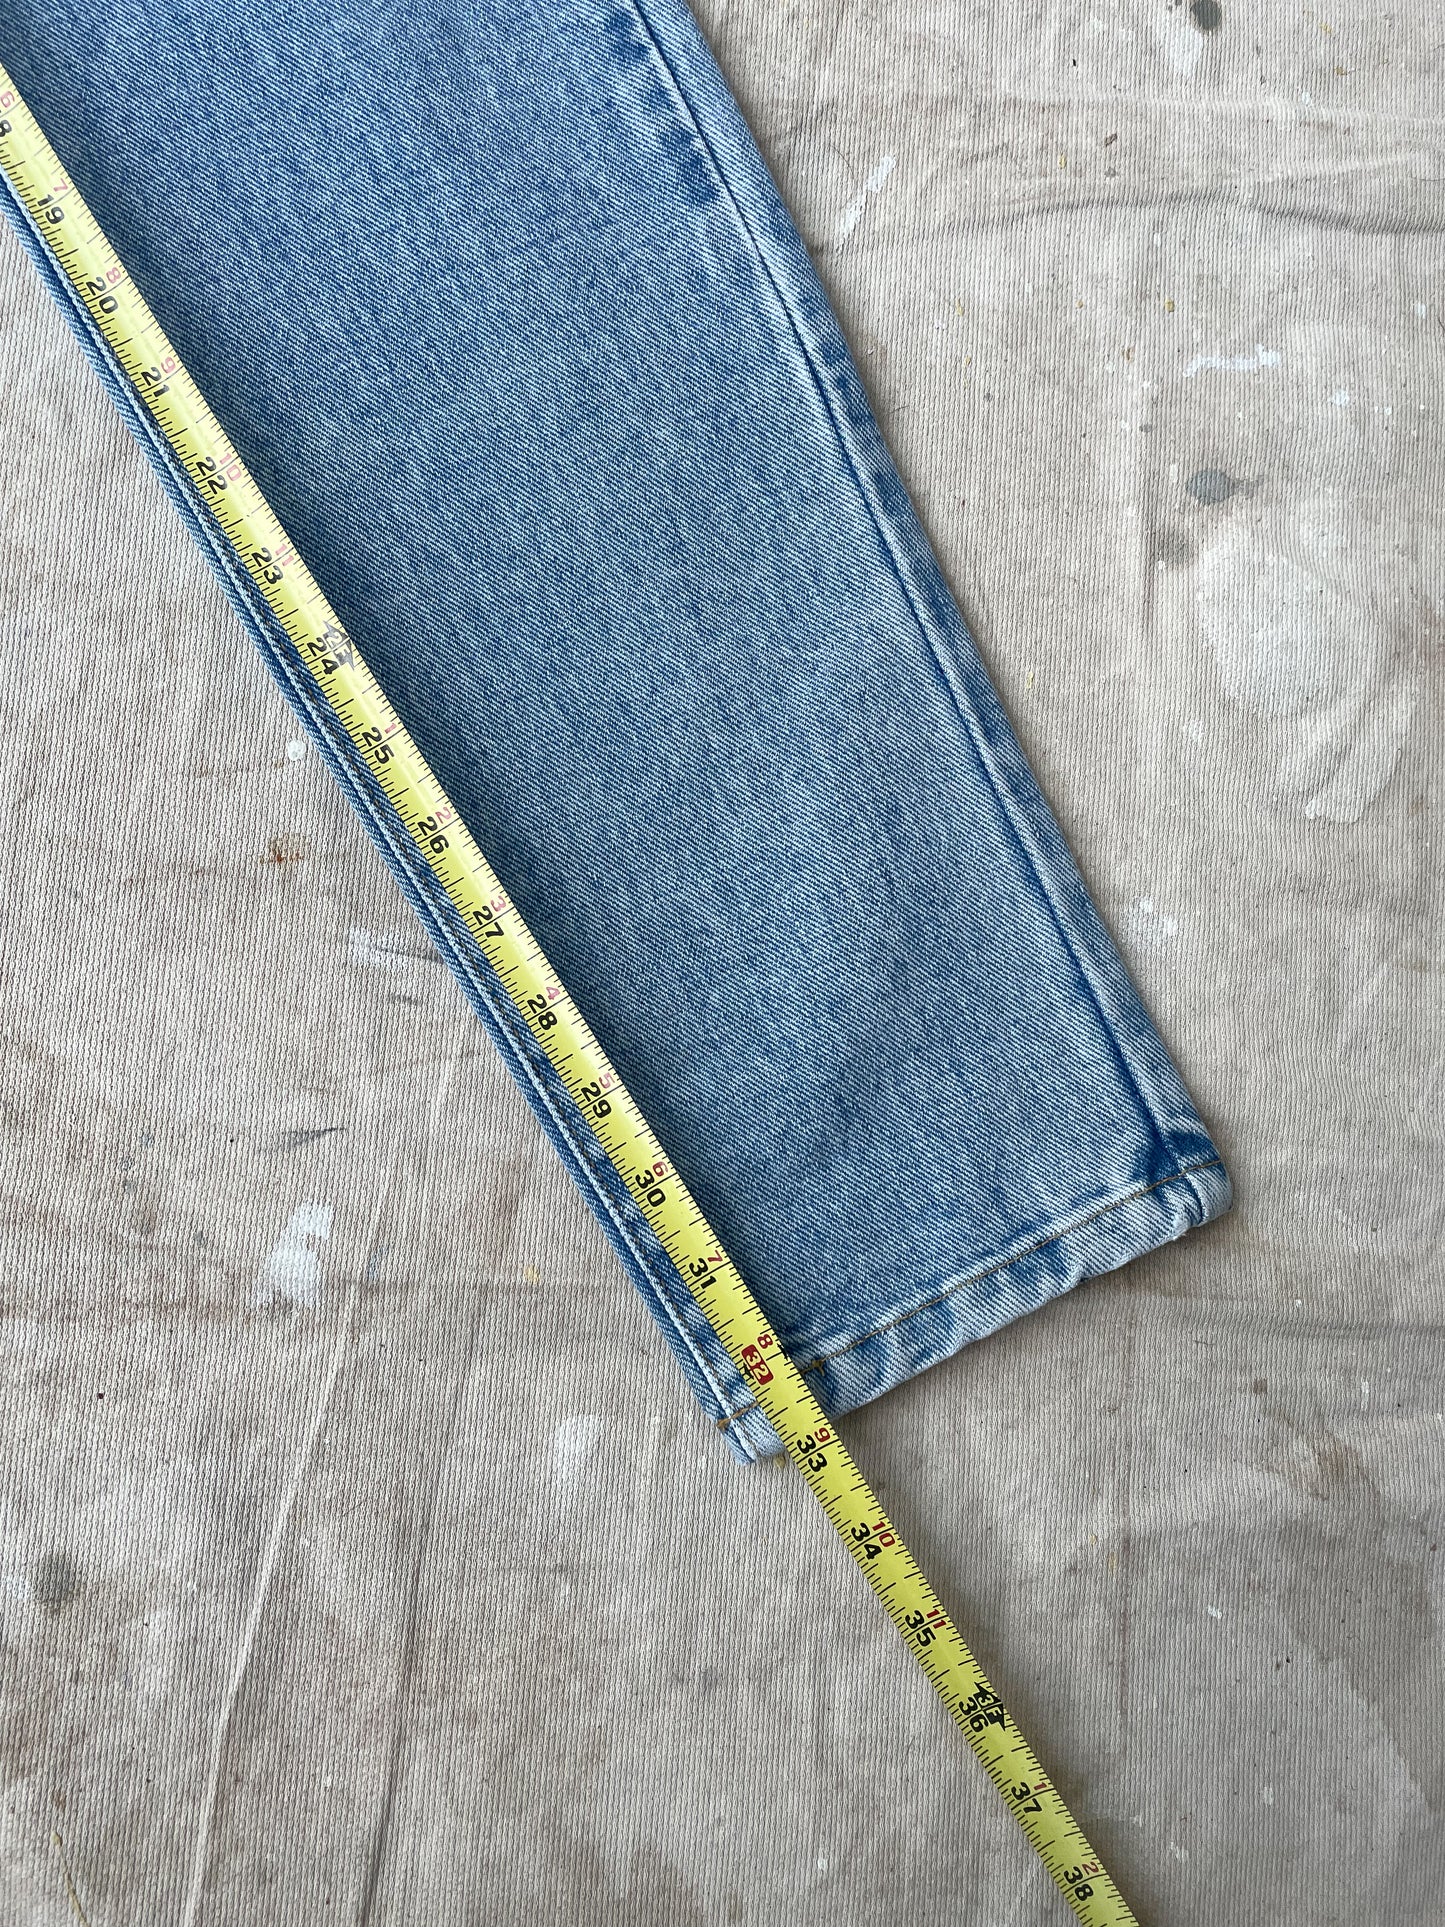 High-Rise Light Wash Jeans—[24X33]